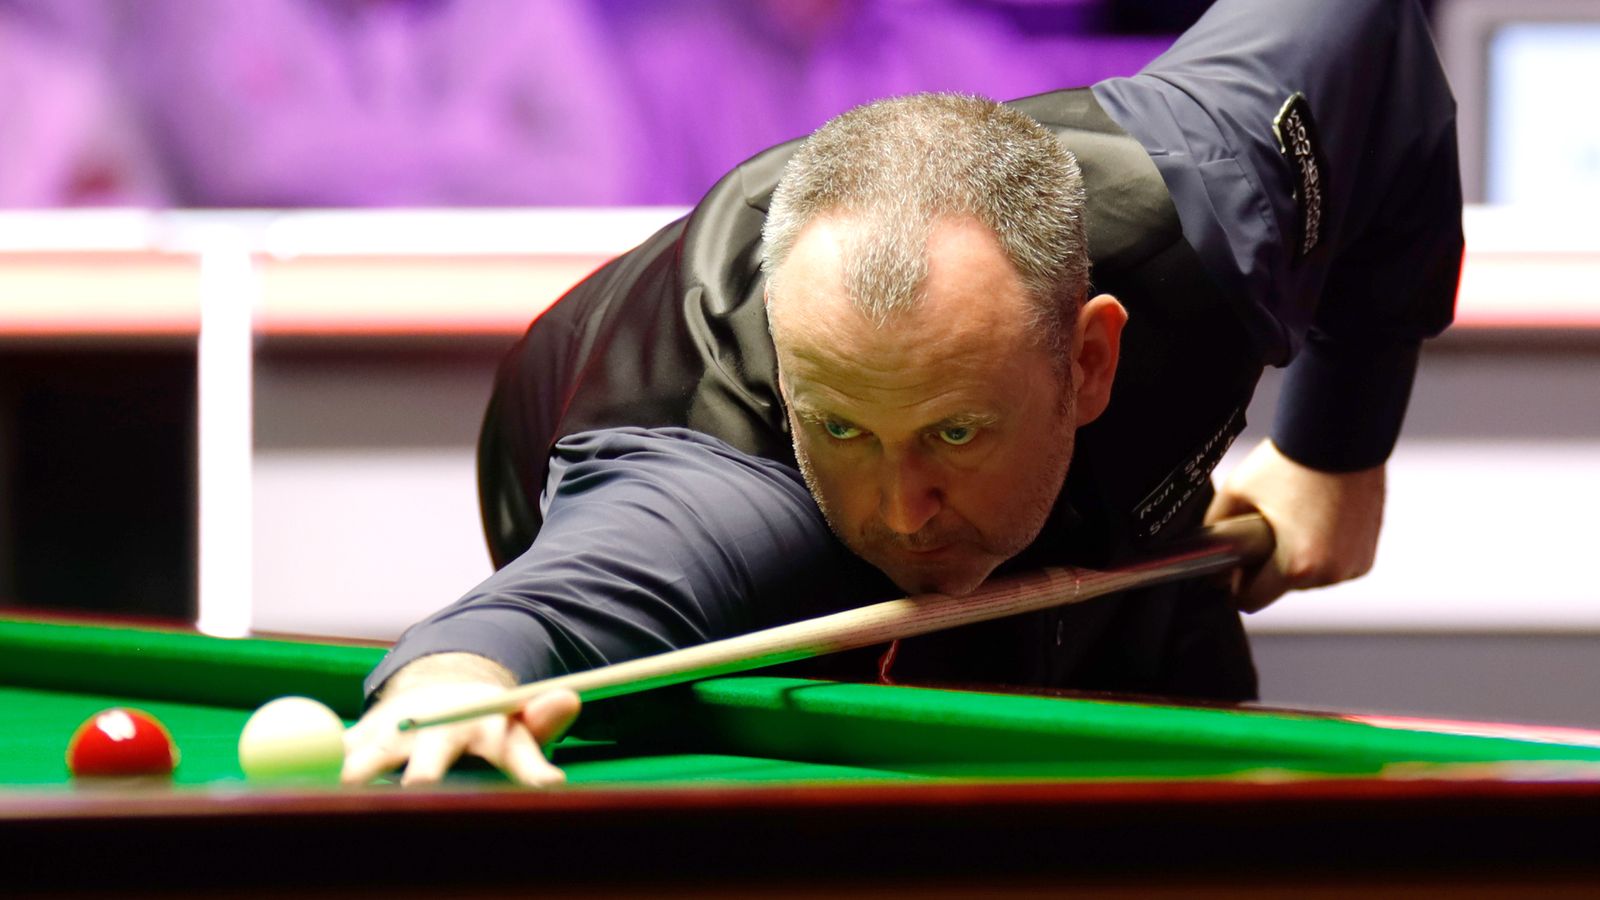 World Snooker Championship: Mark Williams knocks out Si Jiahui in last-frame thriller as seeds keep falling |  Snooker news